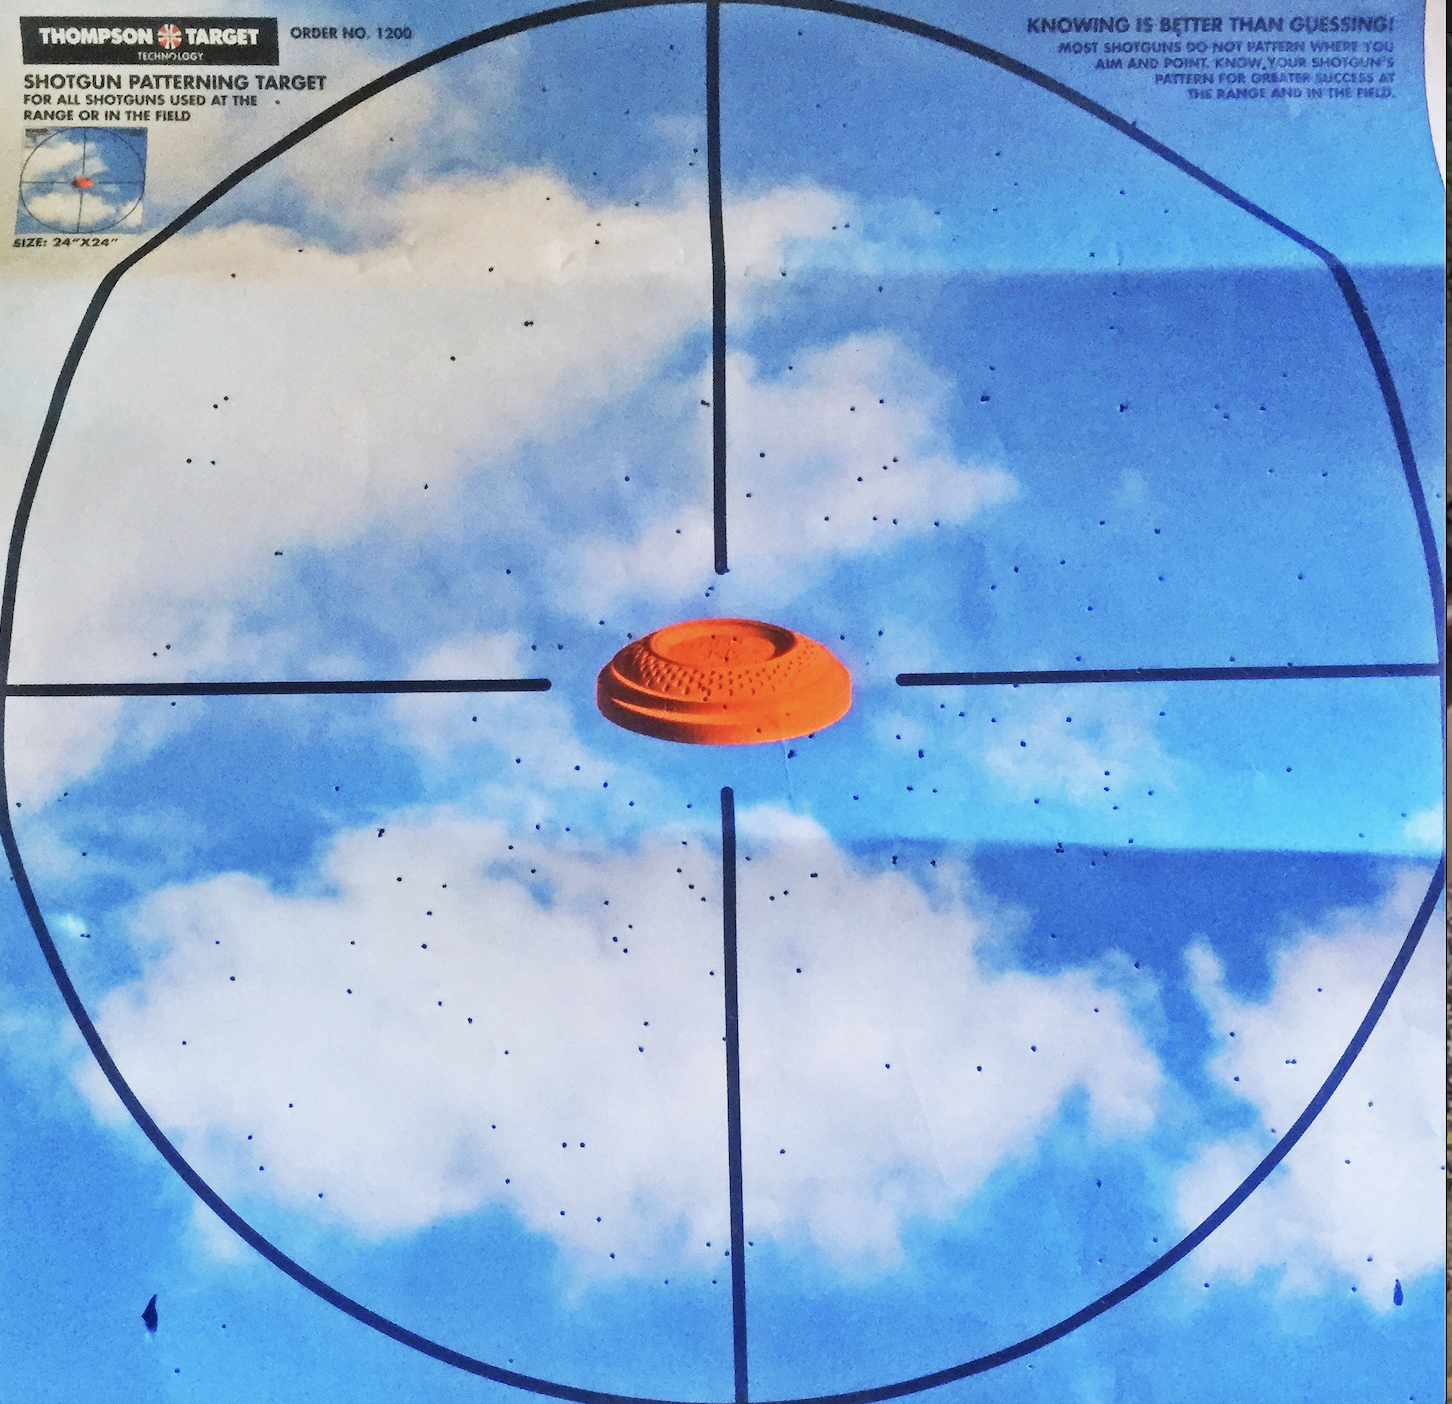 The pattern percentage of the M1 at 30 yards was 57 percent.